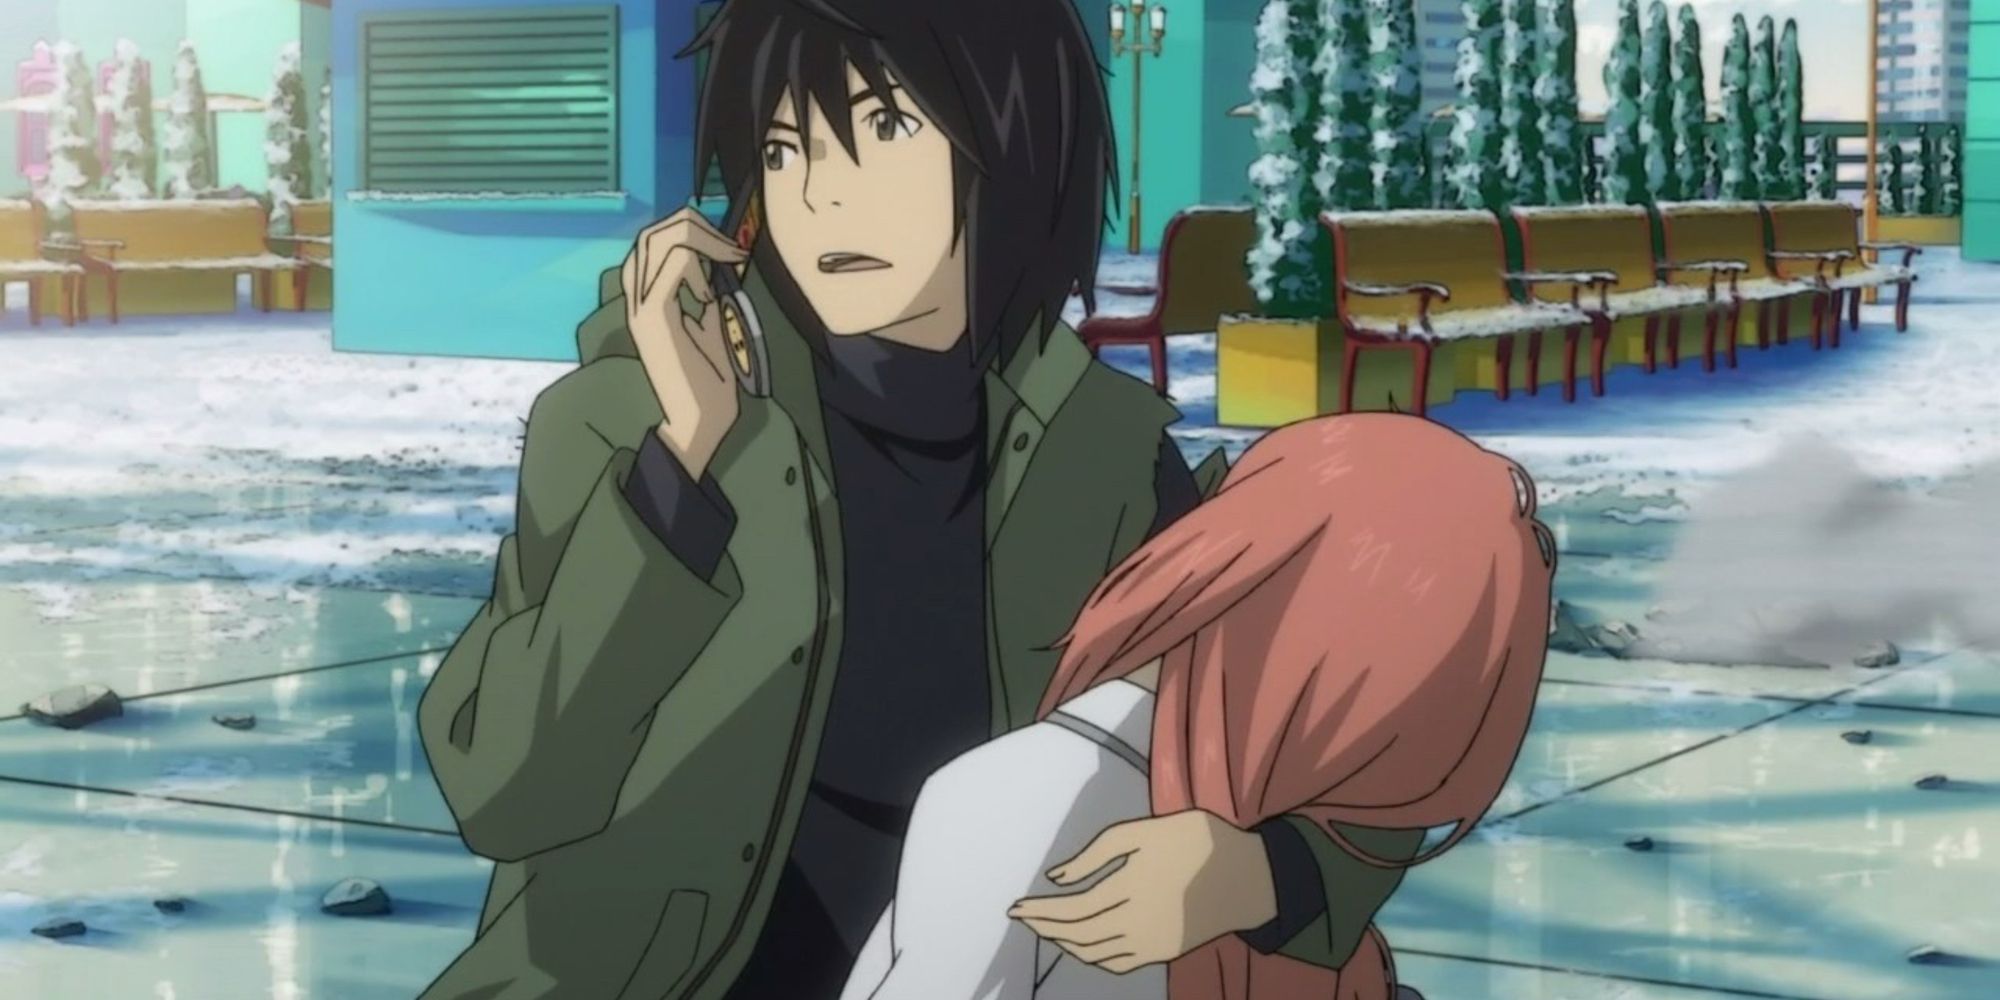 Akira cradles a wounded Saki while calling in for help